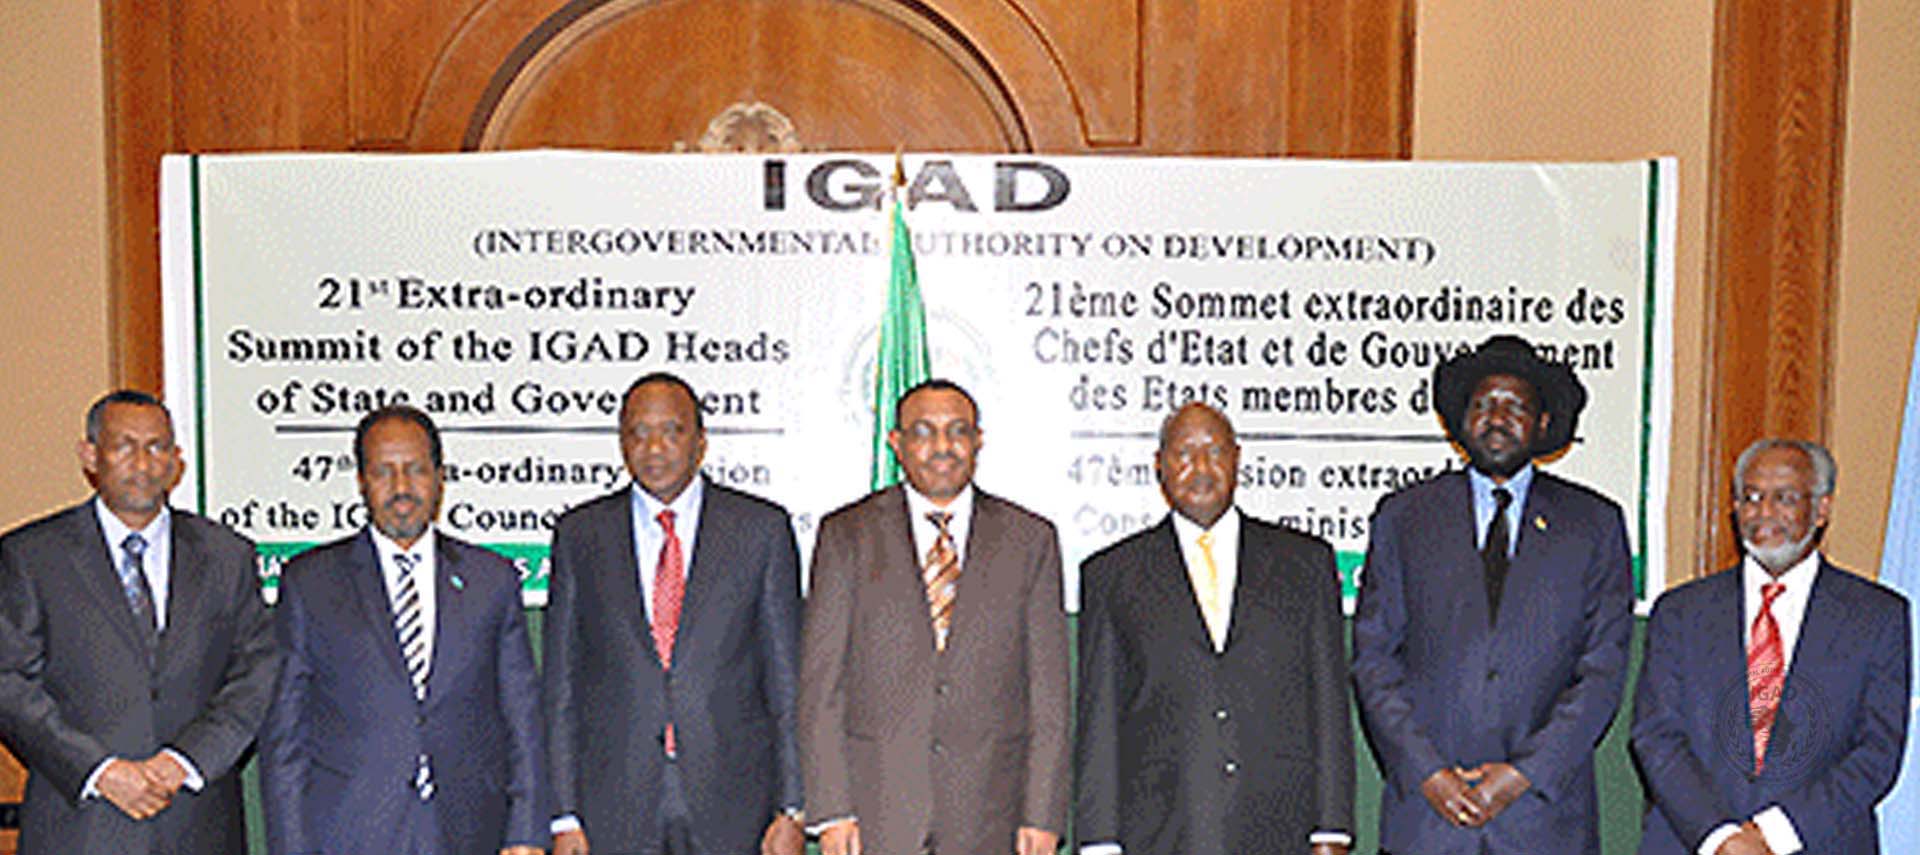 COMMUNIQUE OF THE 21ST EXTRAORDINARY SUMMIT OF HEADS OF STATE AND GOVERNMENT OF IGAD